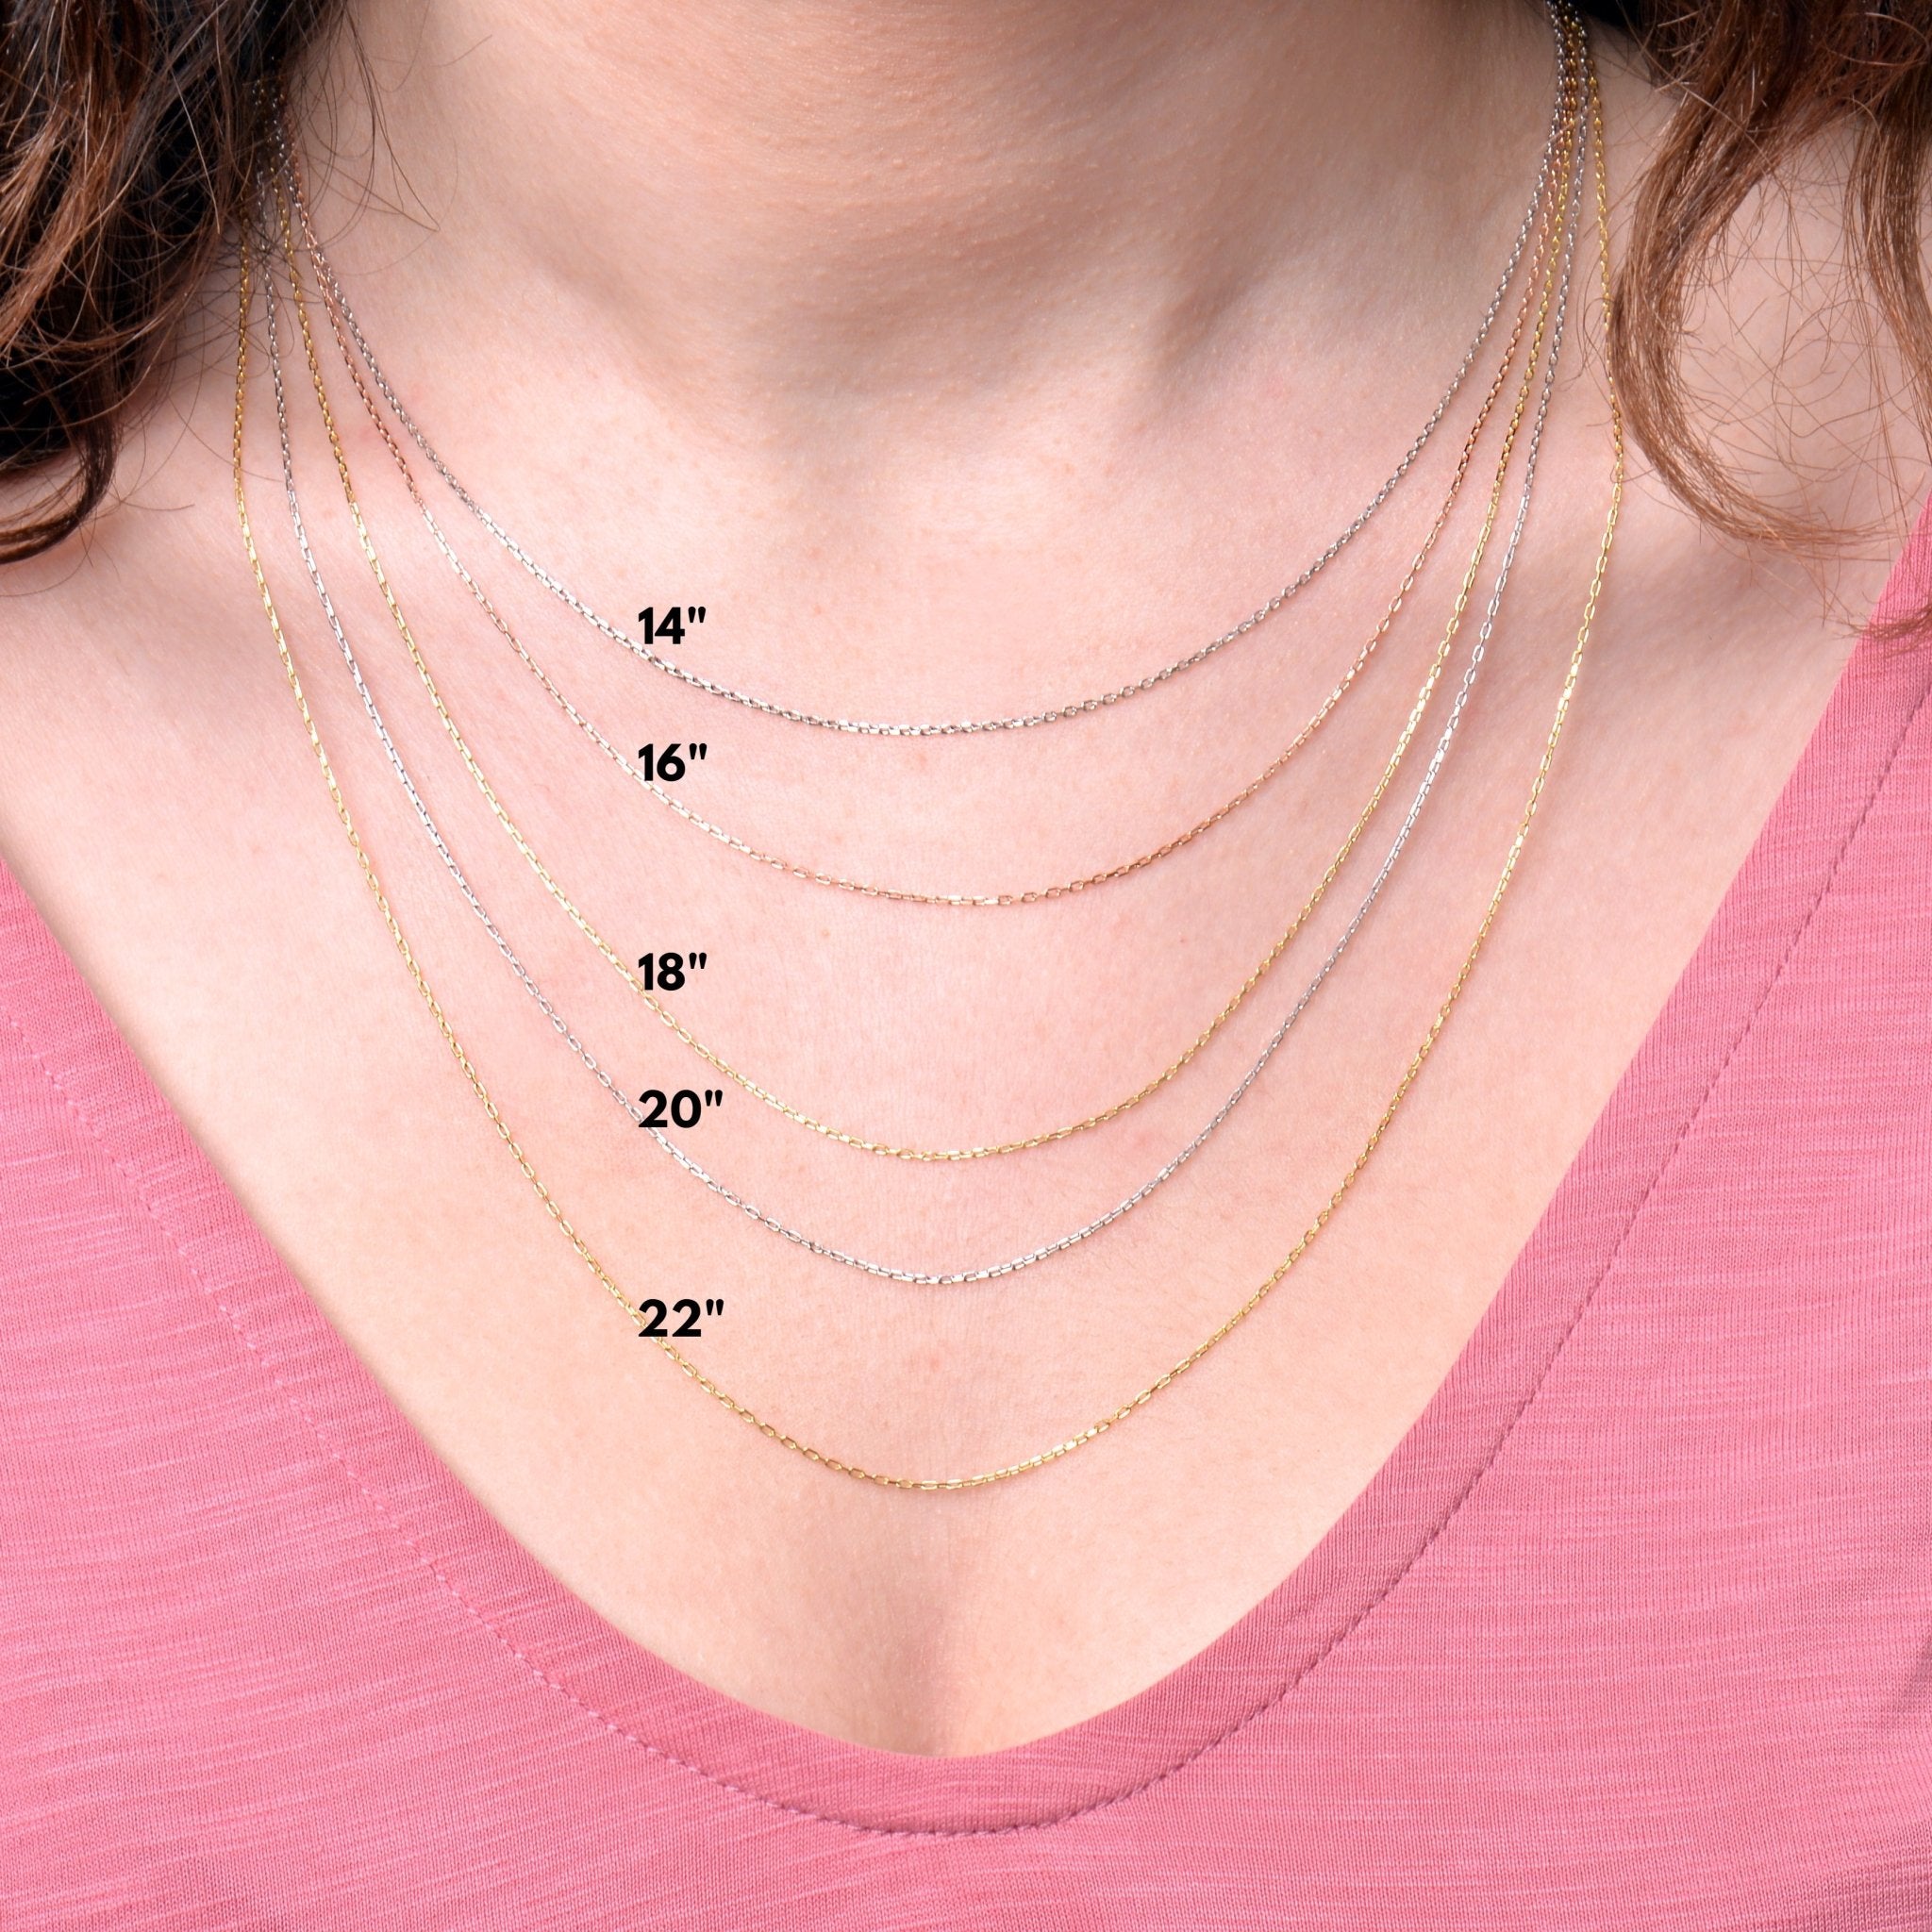 Jewelry Necklace Length from 14'' to 20'' for Jewelry Gift